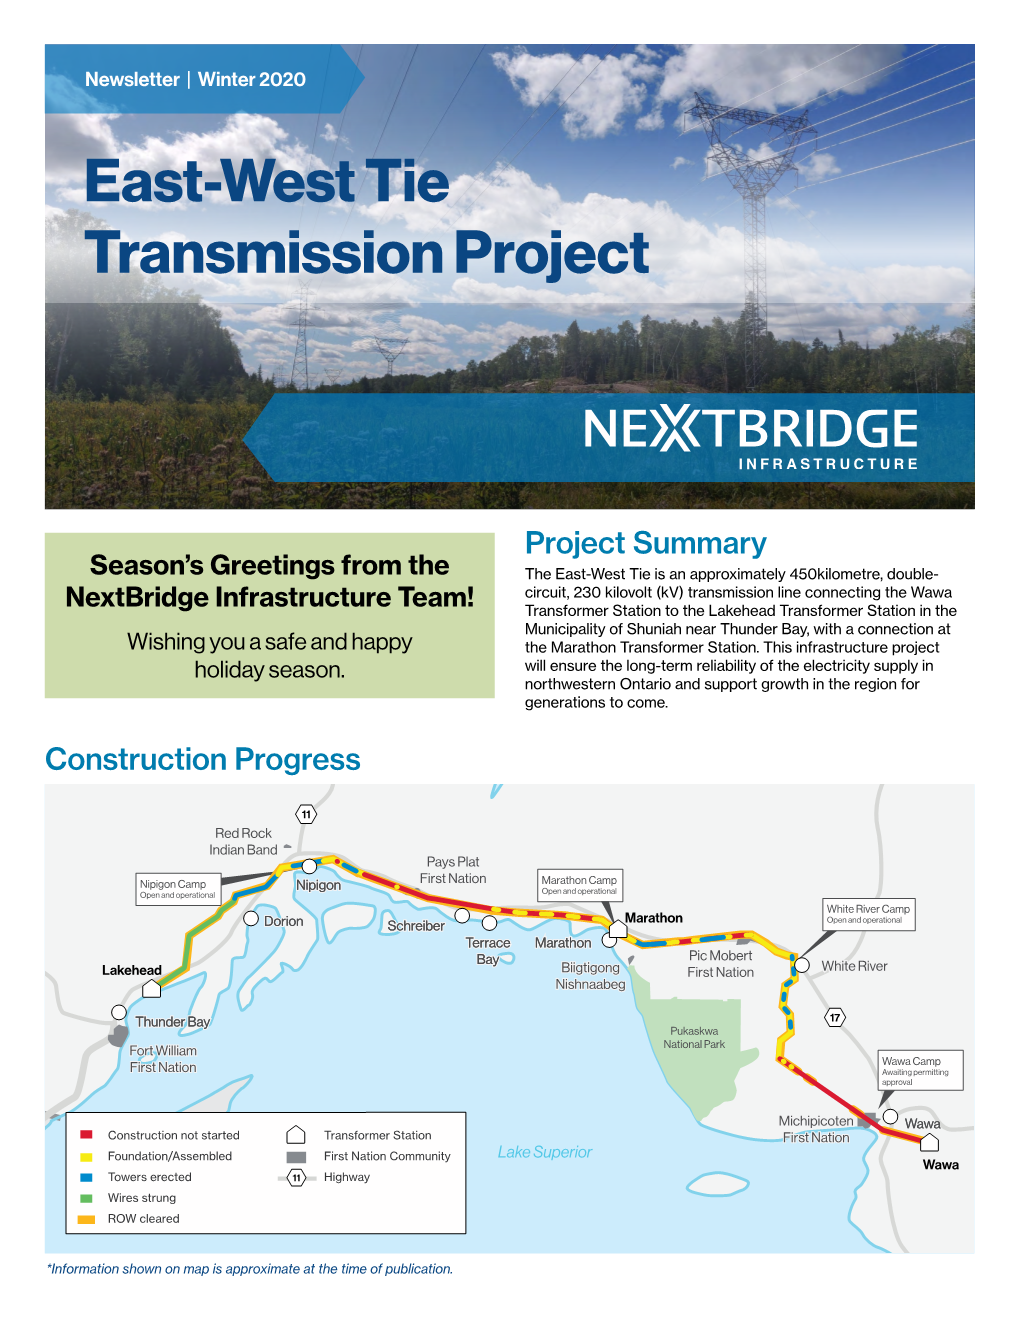 East-West Tie Transmission Project